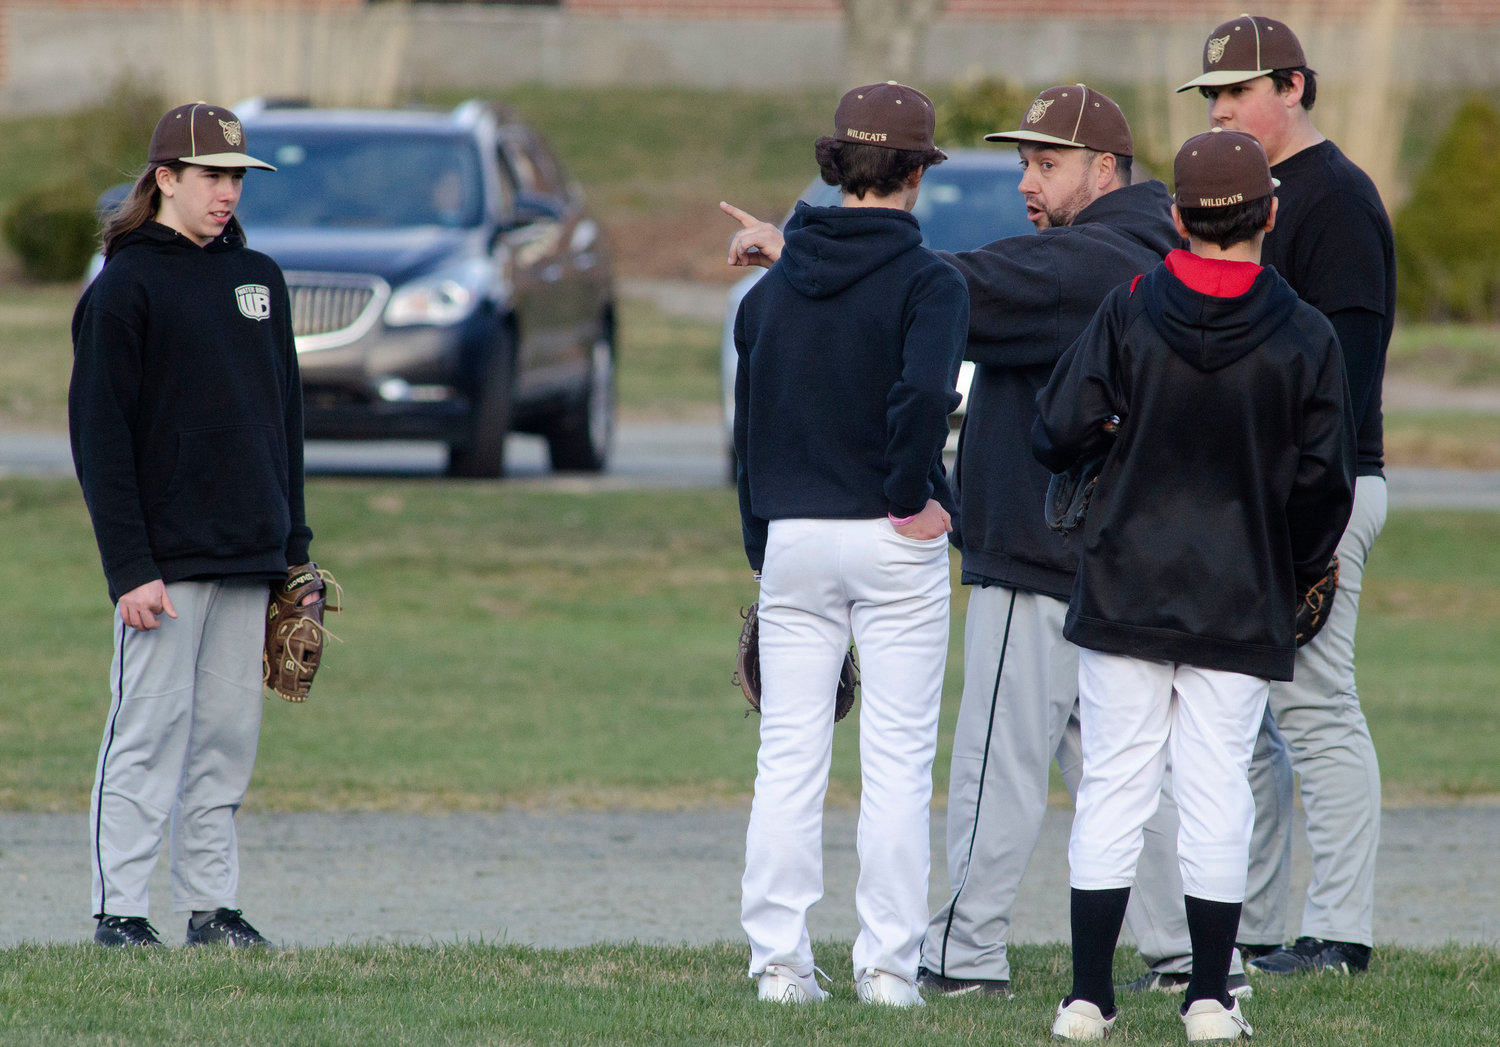 Wildcats head coach Jason Pacheco speaks to his young infield during a scrimmage game against Tiverton on Wednesday.